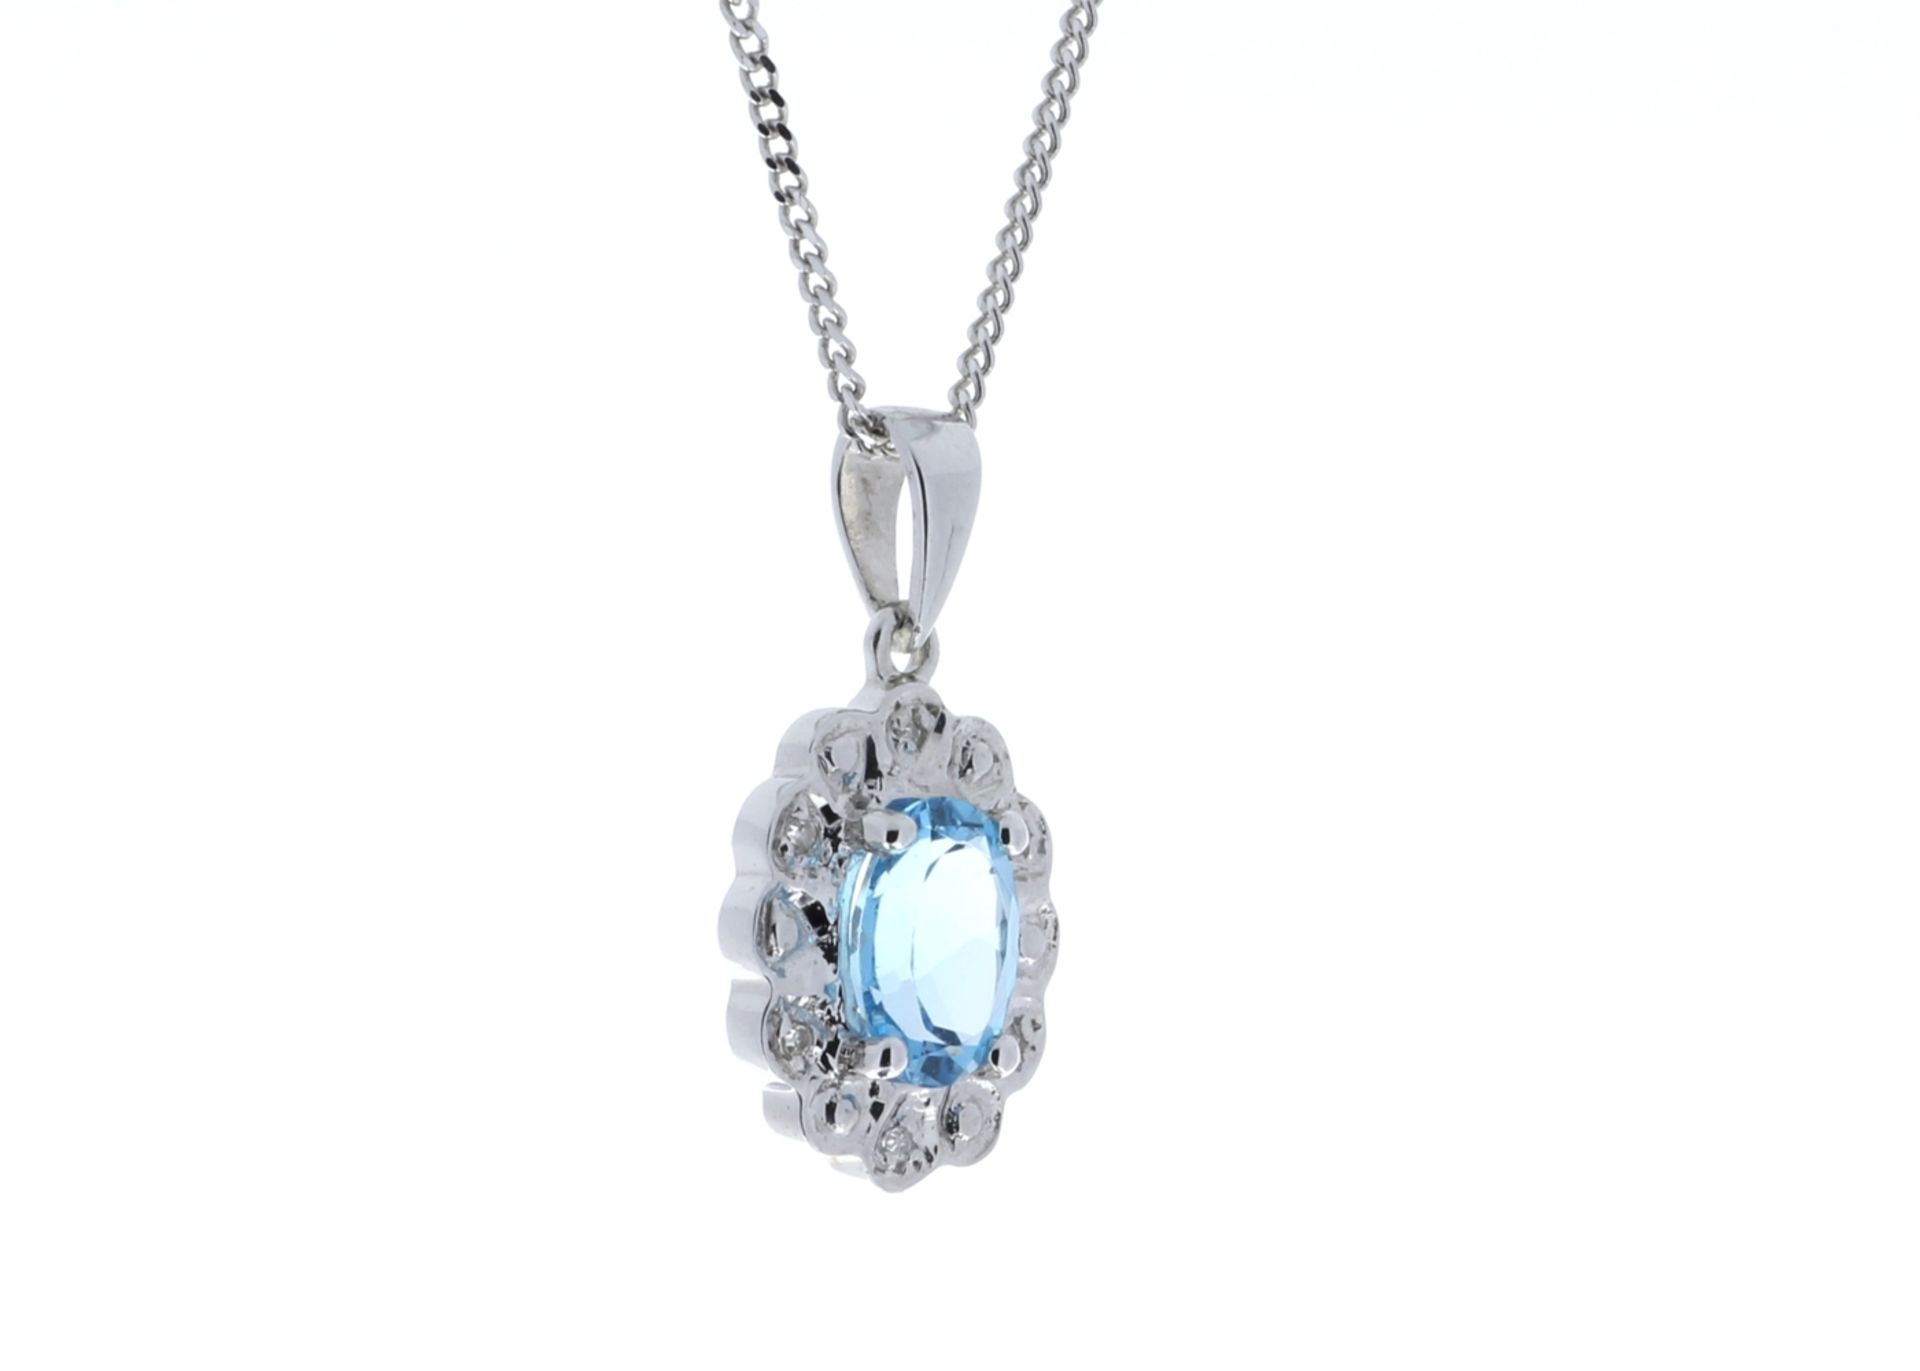 9ct White Gold Fancy Cluster Diamond Blue Topaz Pendant (BT0.86) 0.02 Carats - Valued By AGI £950.00 - Image 2 of 6